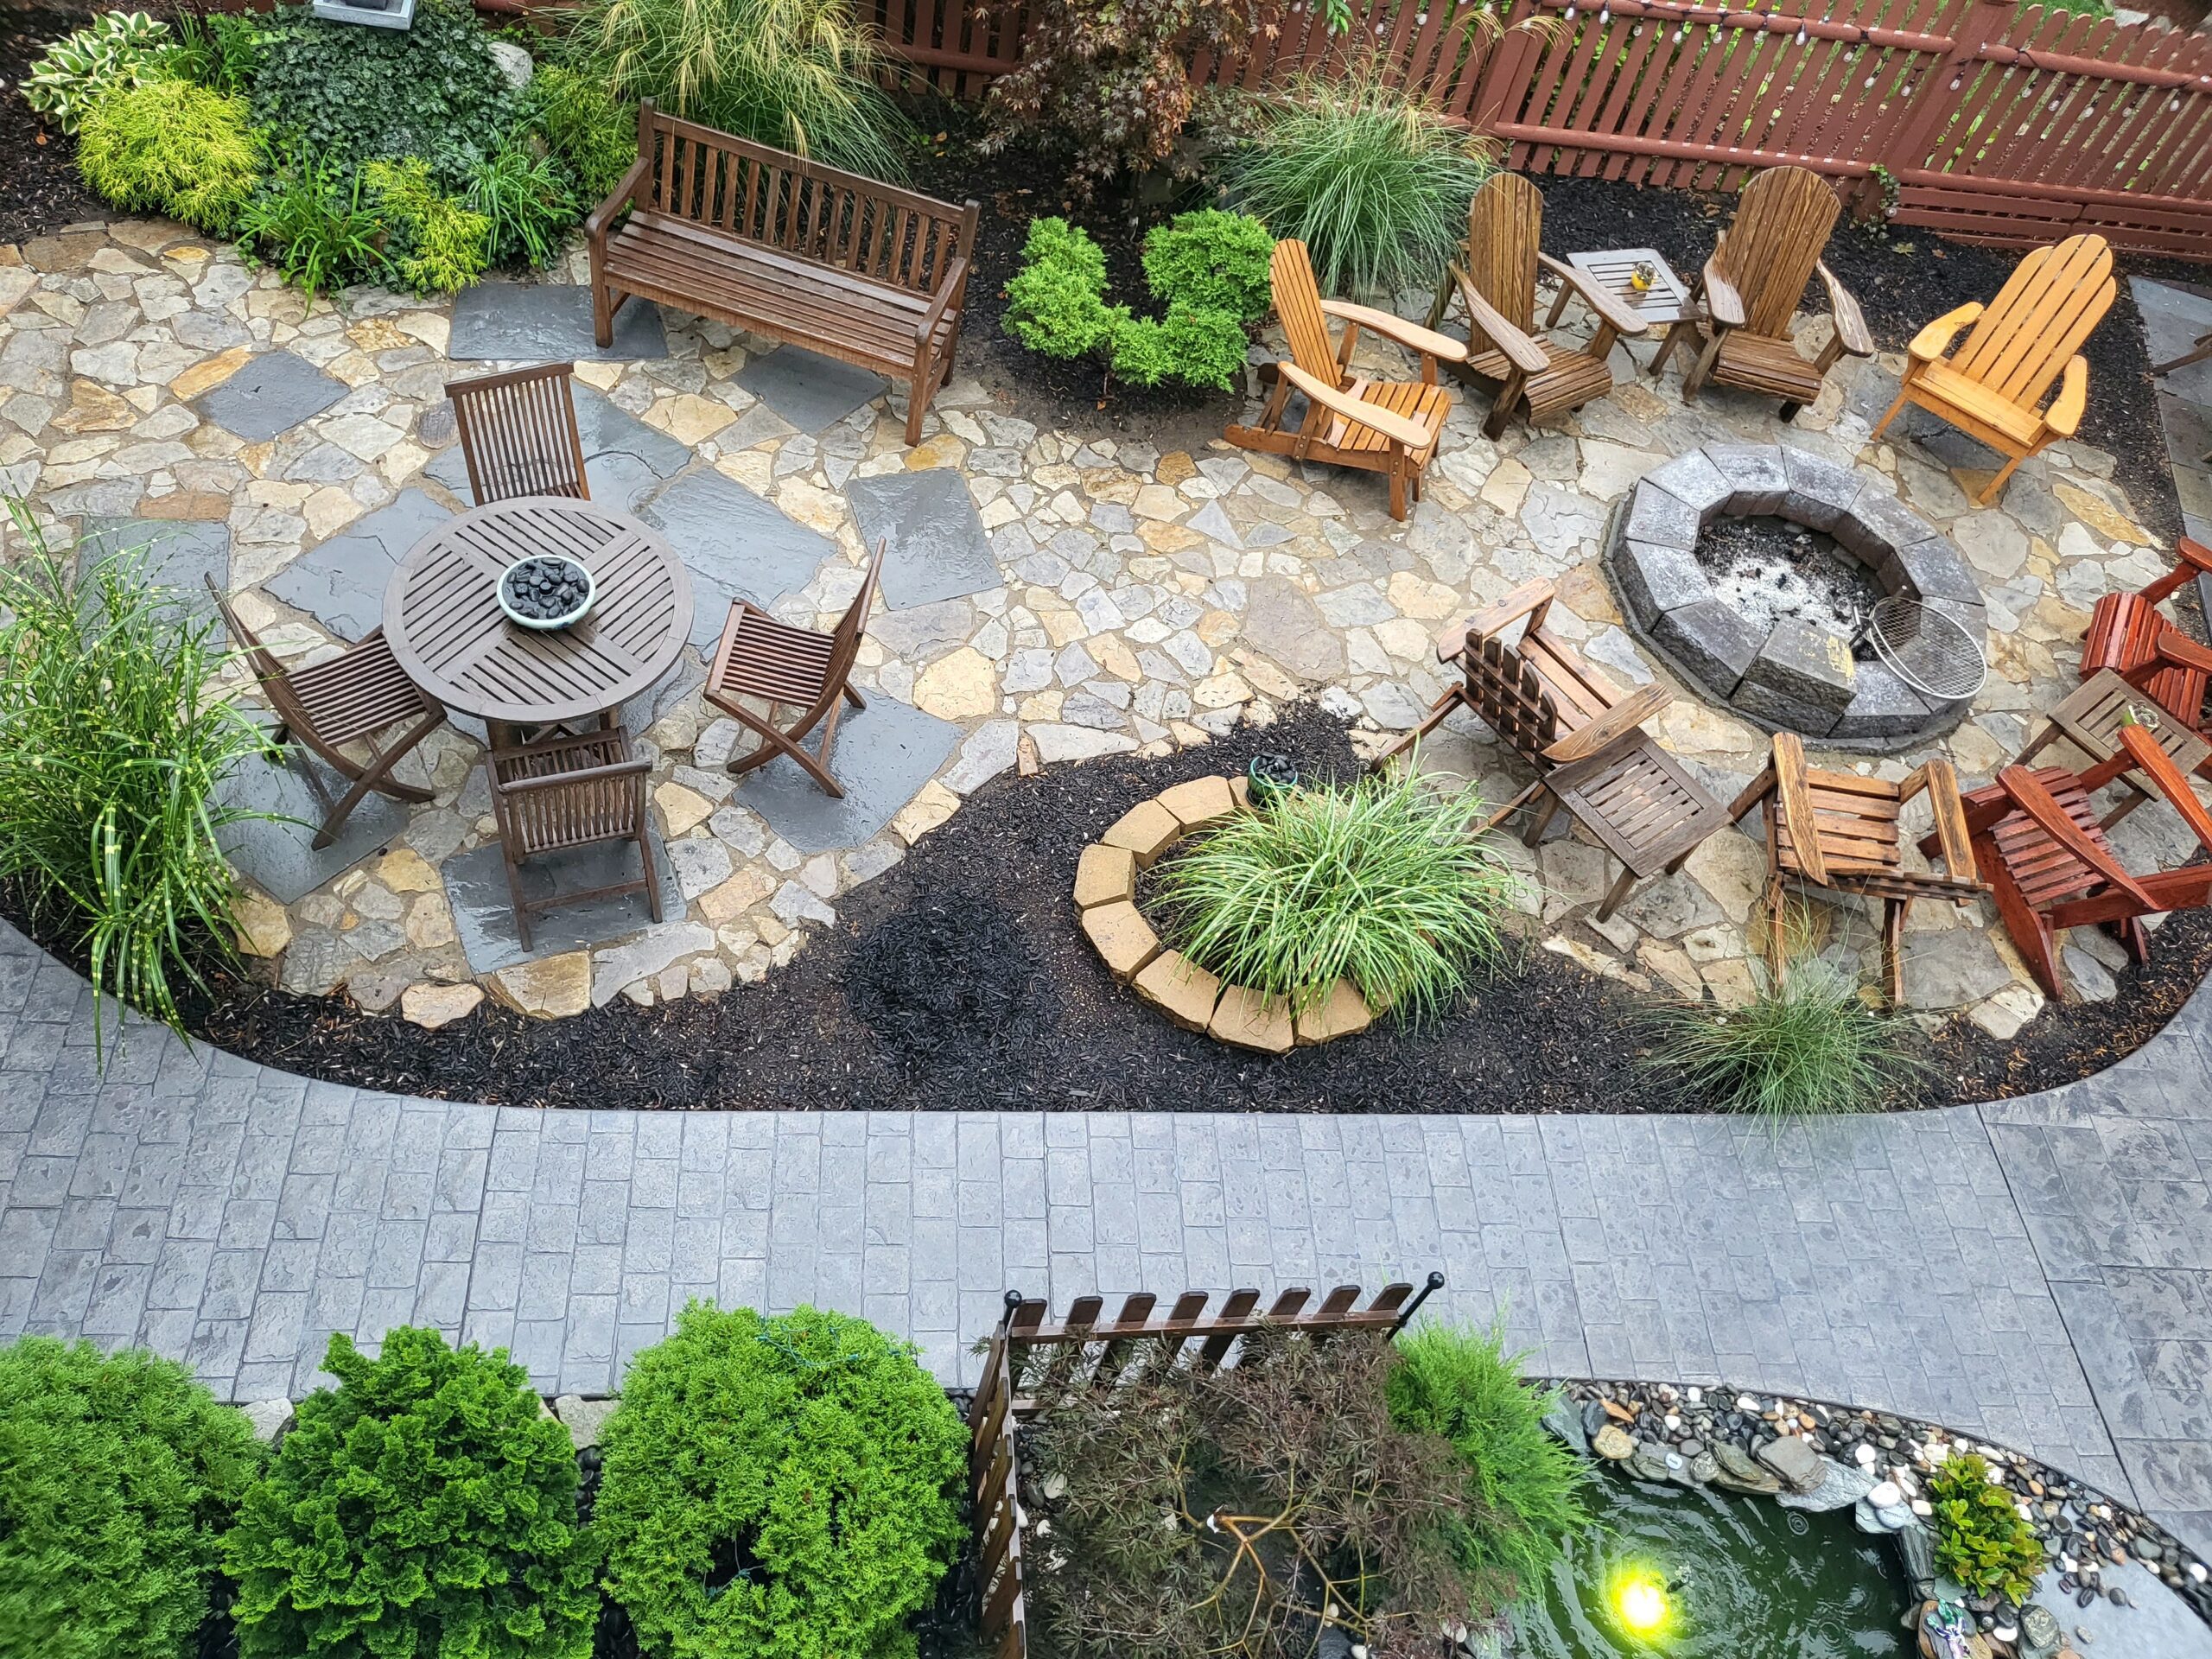 An aerial view of a spacious patio deck featuring a firepit area with chairs, a round outdoor table area, and a paver walkway stained with light charcoal concrete. The patio deck floor is made of natural stones in various sizes, stained in Tweed, Charcoal, and Silver Gray concrete stains, creating a serene and inviting atmosphere.